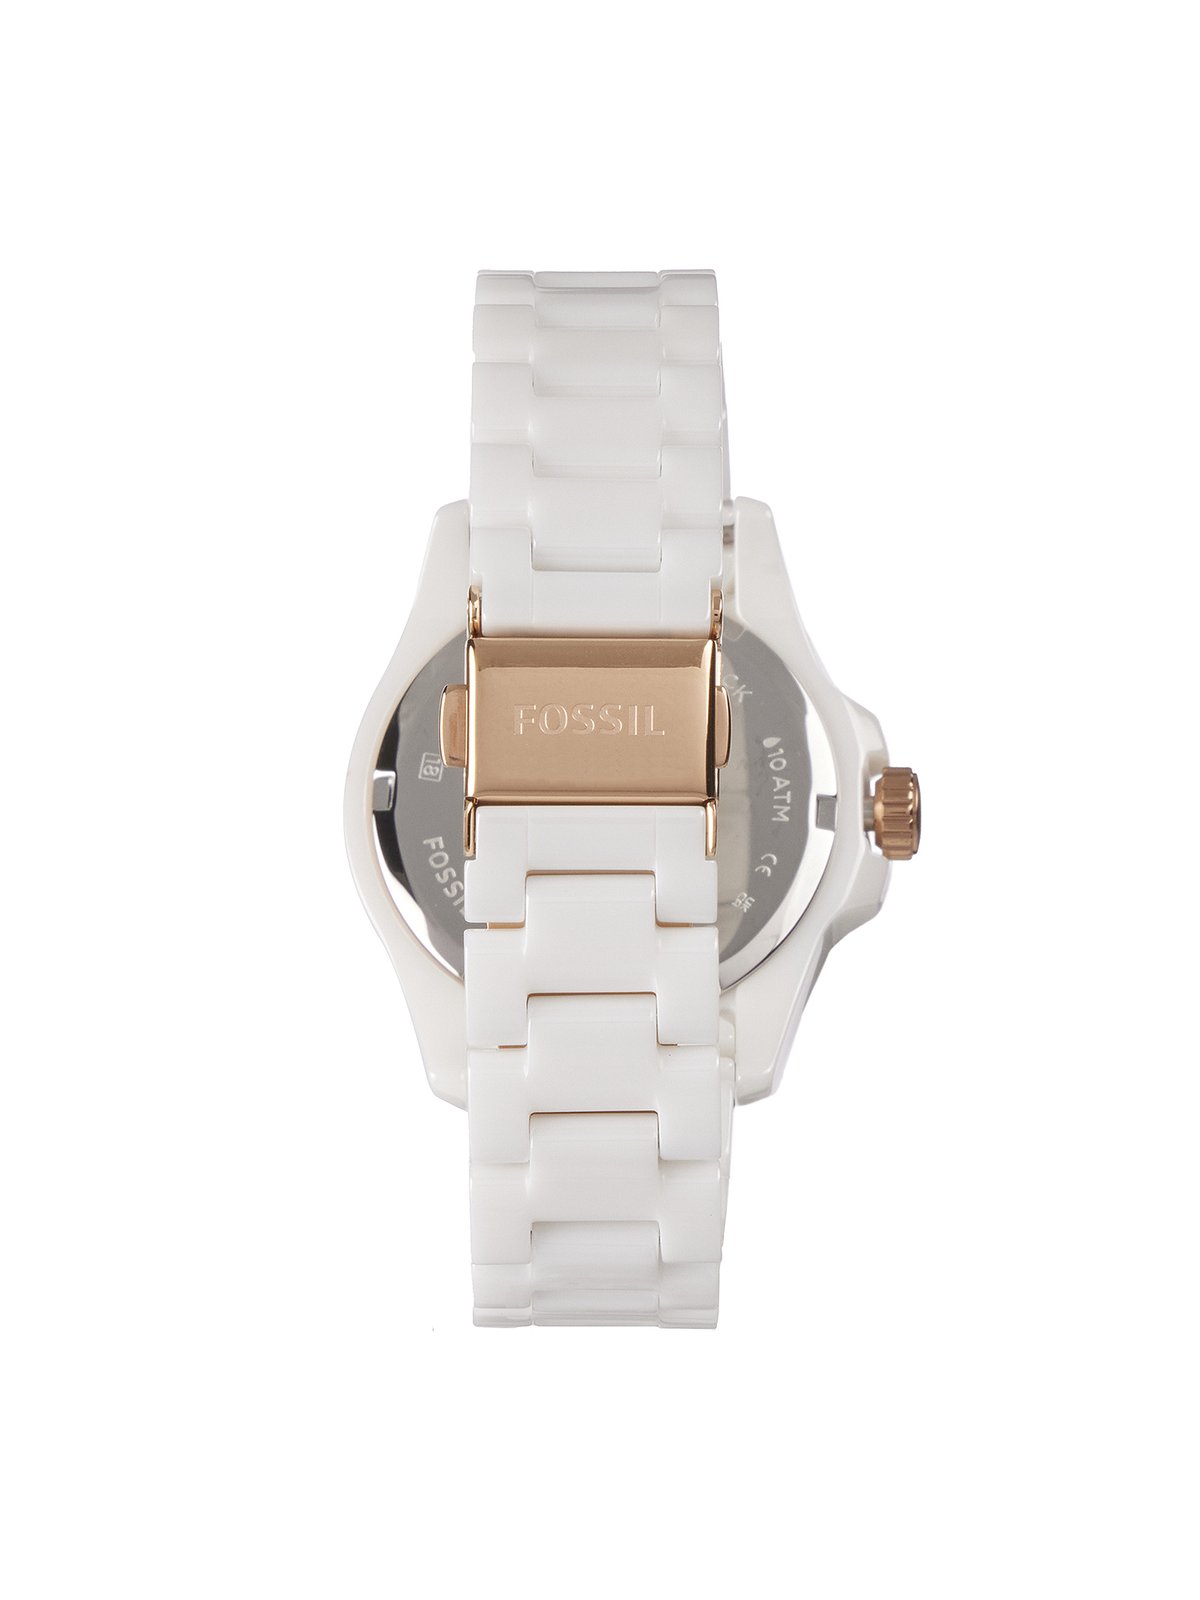 Fossil Women's CE1107 White Fb-01 Crystal Ceramic Watch